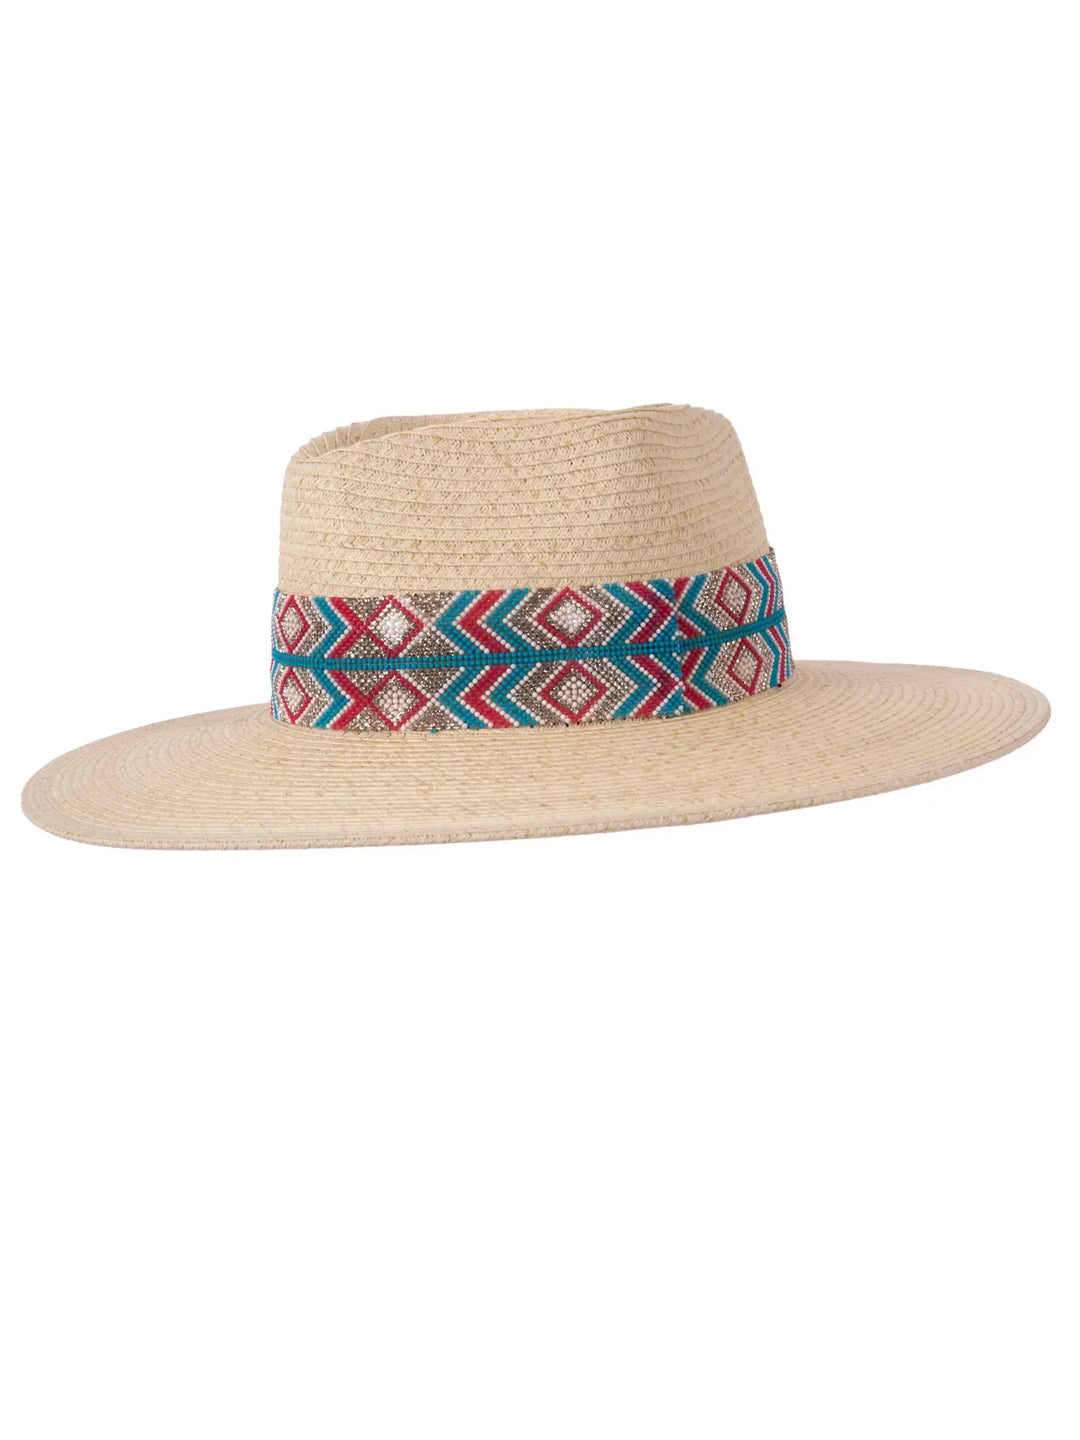 American Hat Makers Taos Straw Hat